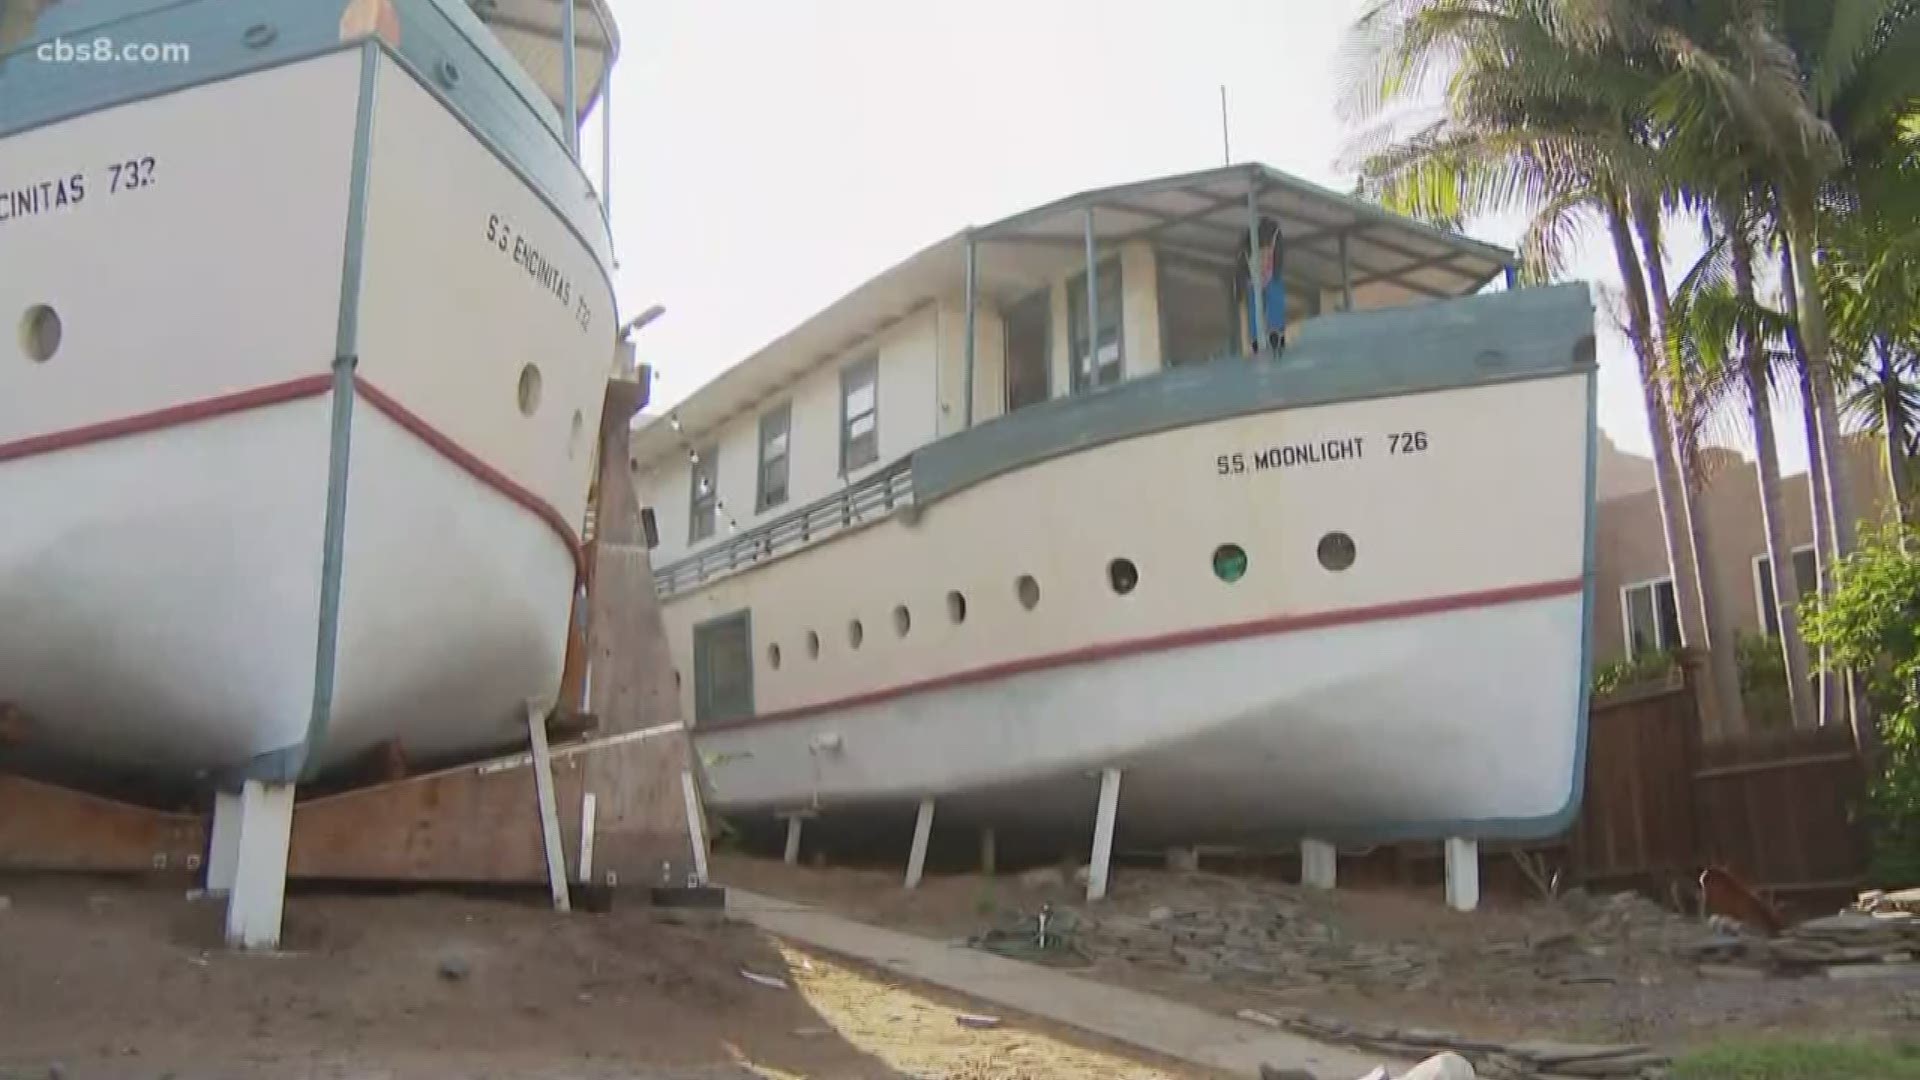 The large boats, located in the middle of an Encinitas neighborhood, are actual homes built in 1928.